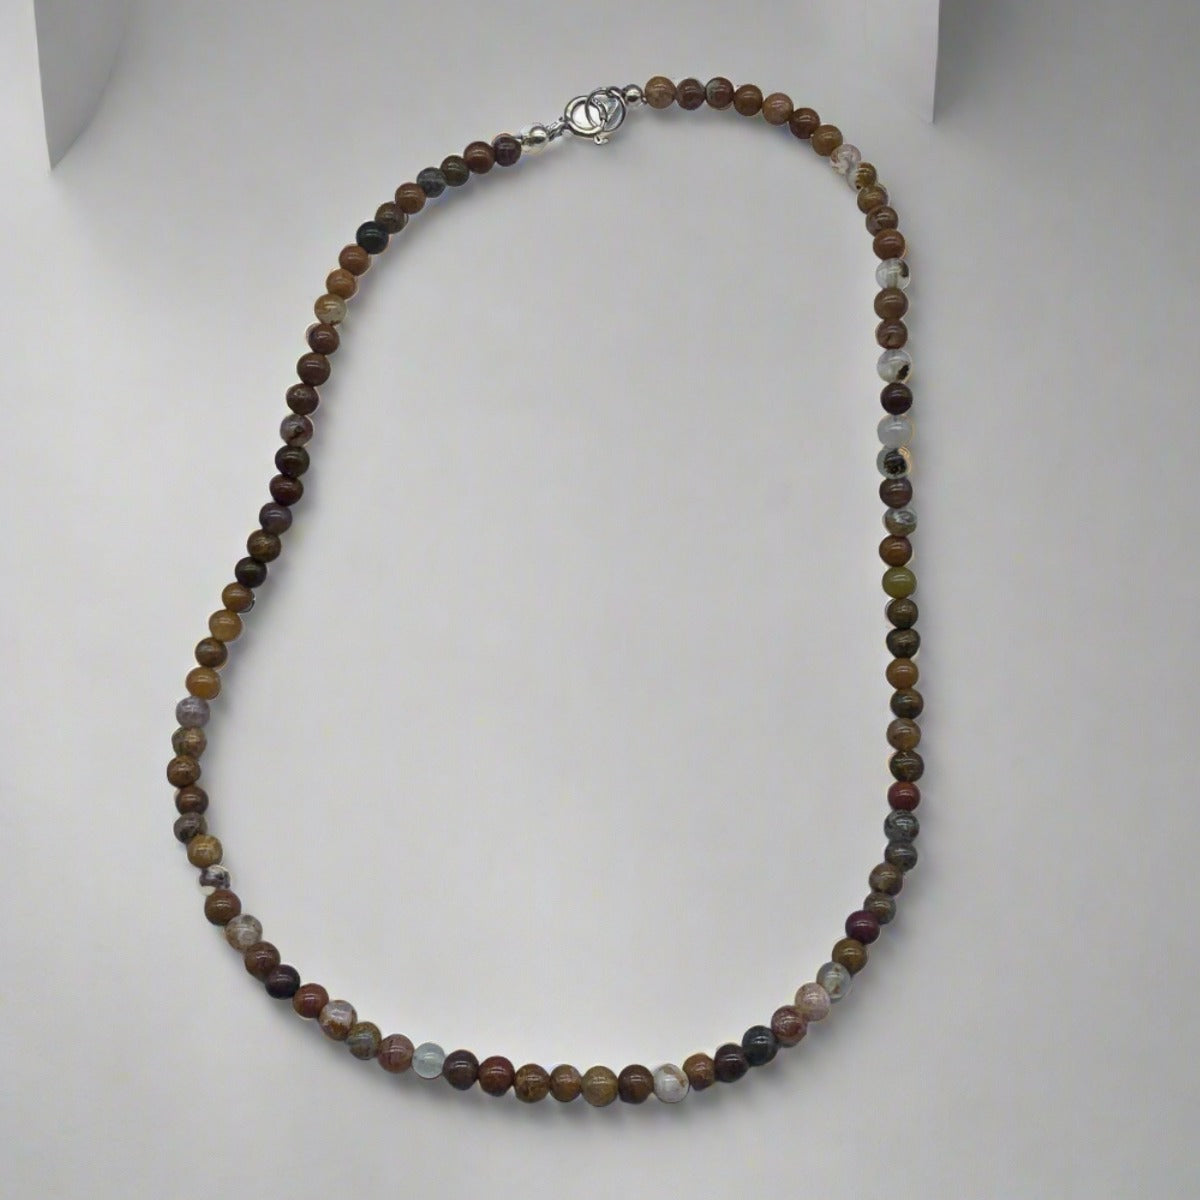 A necklace featuring brown and beige banded pattern stones with a sterling silver jump ring clasp